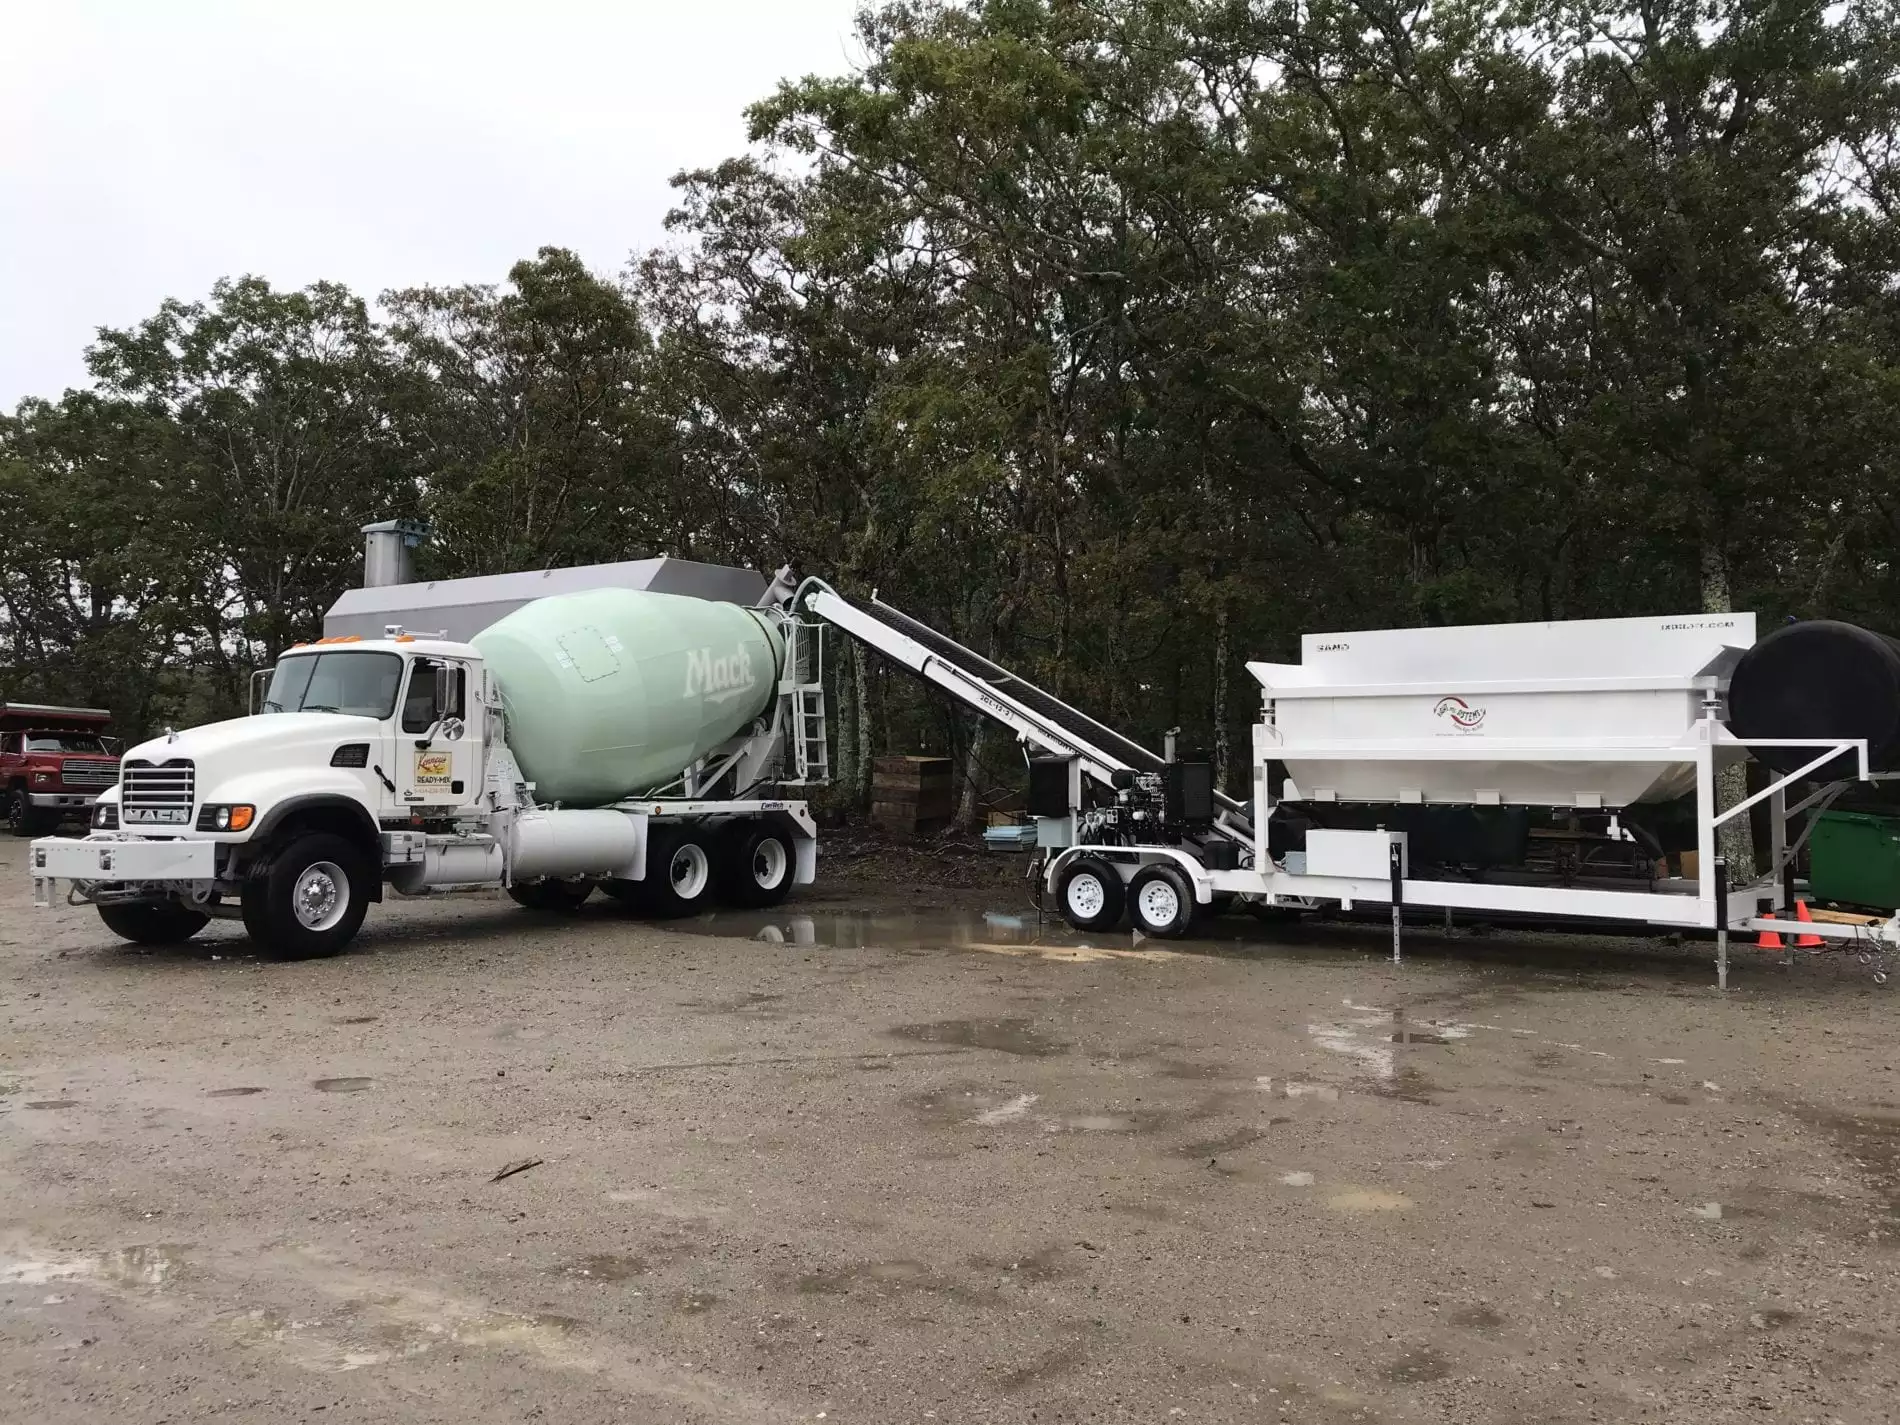 Portable Concrete Batching Plant 12+ Cubic Yards Automated Mix Right 2CL-12-2 & Portable Cement Silo Loading Concrete Truck On Site by Right Manufacturing Systems Inc.